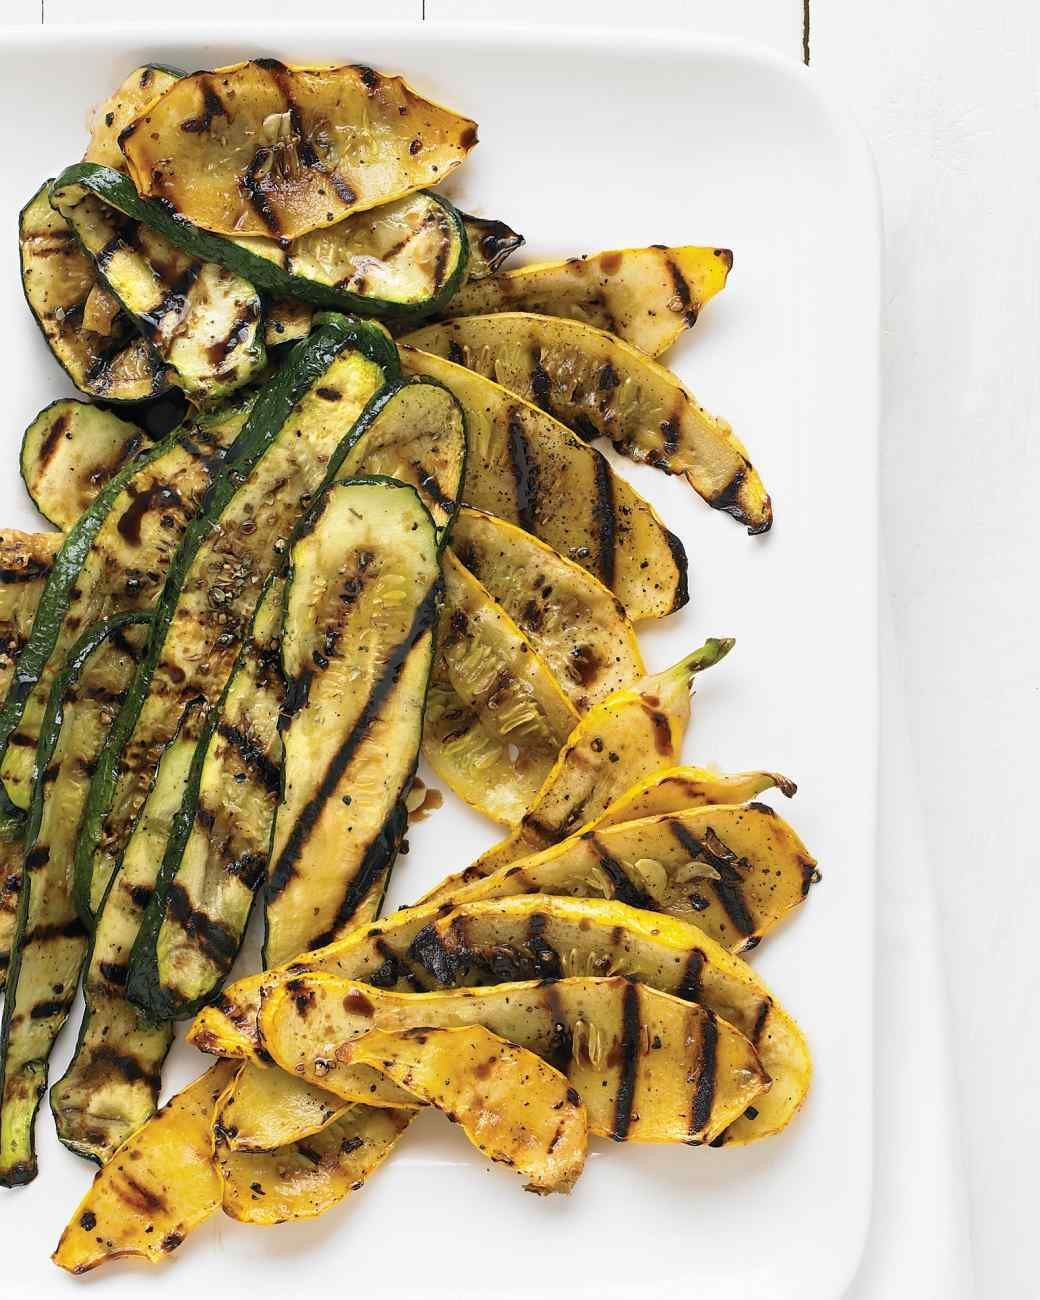 Marinated and Grilled Zucchini and Summer Squash -   16 grilled squash recipes
 ideas